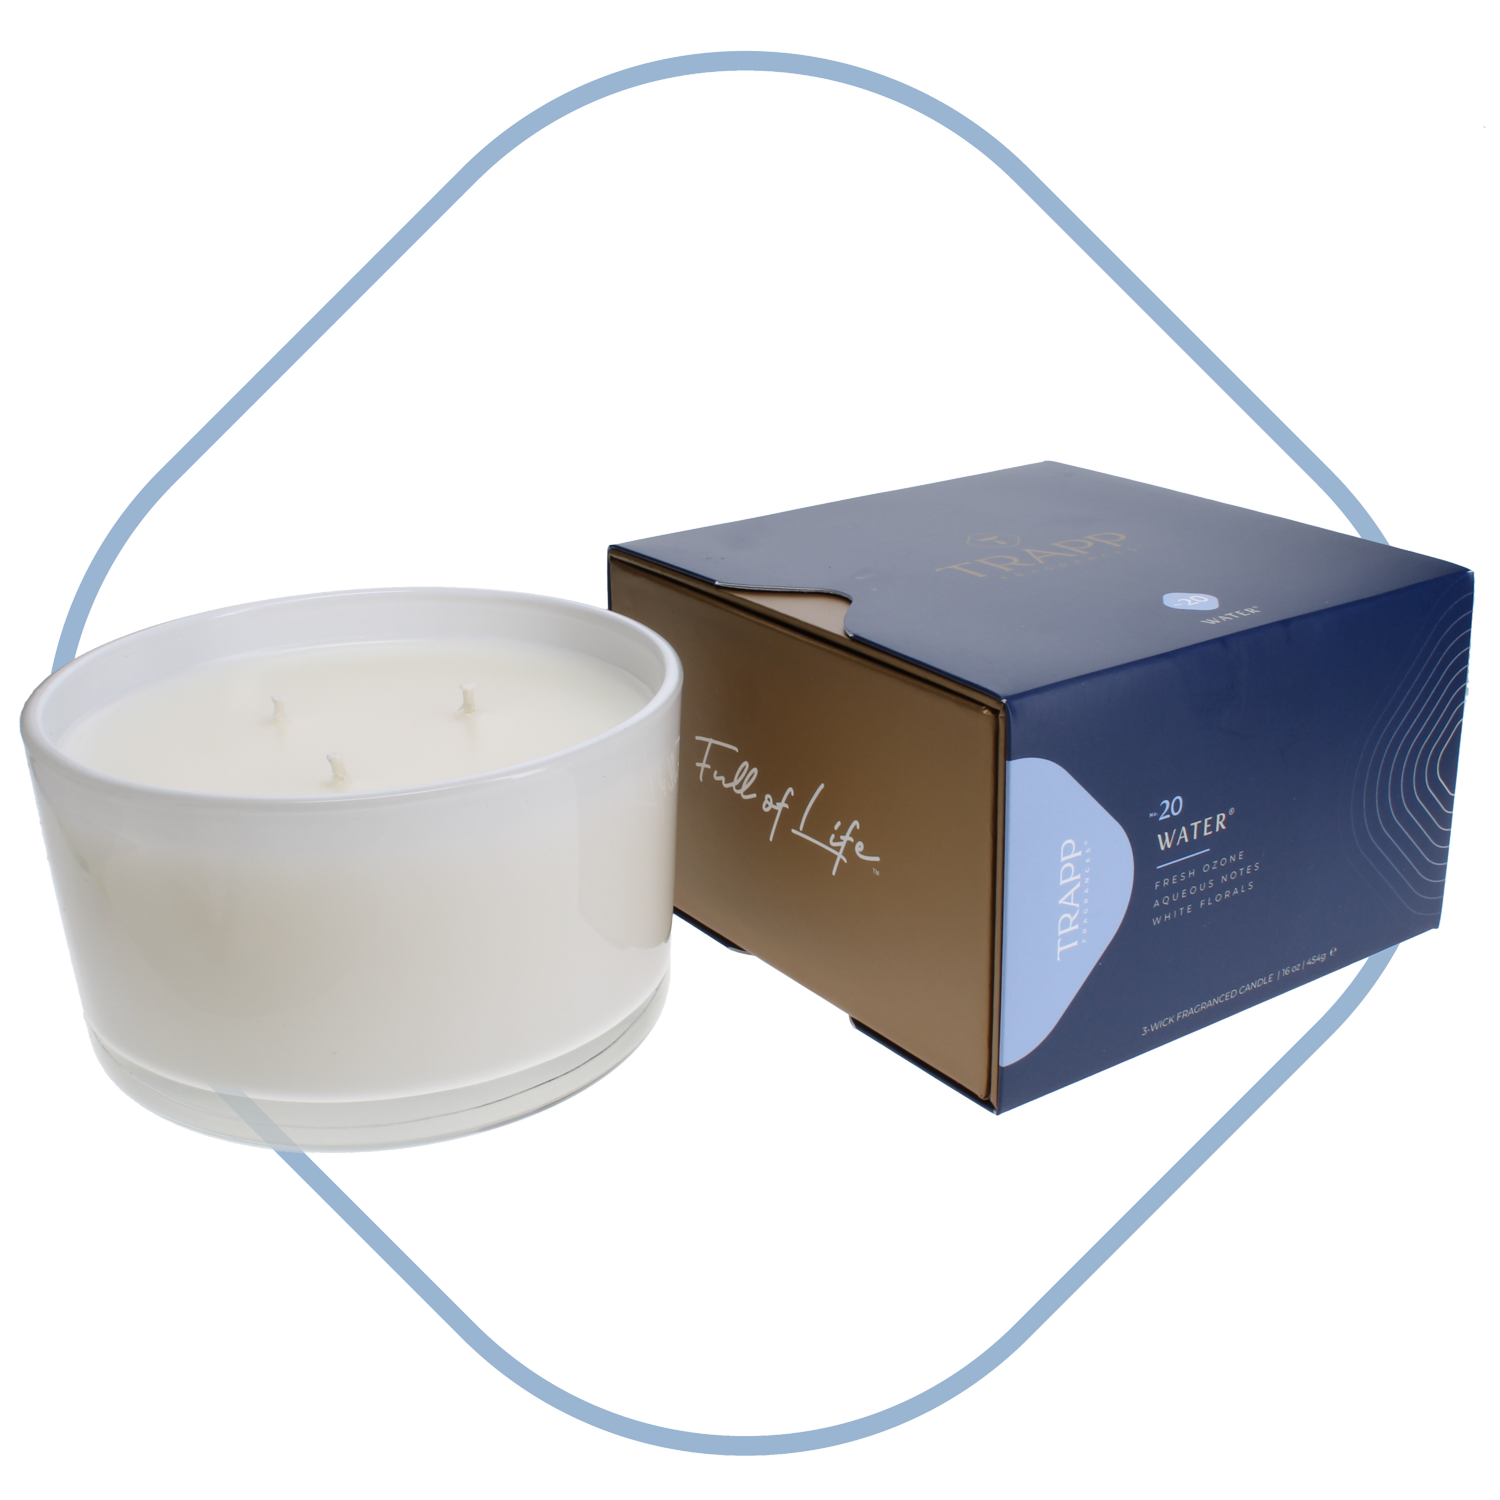 No. 20 Water 16 oz. 3-Wick Candle